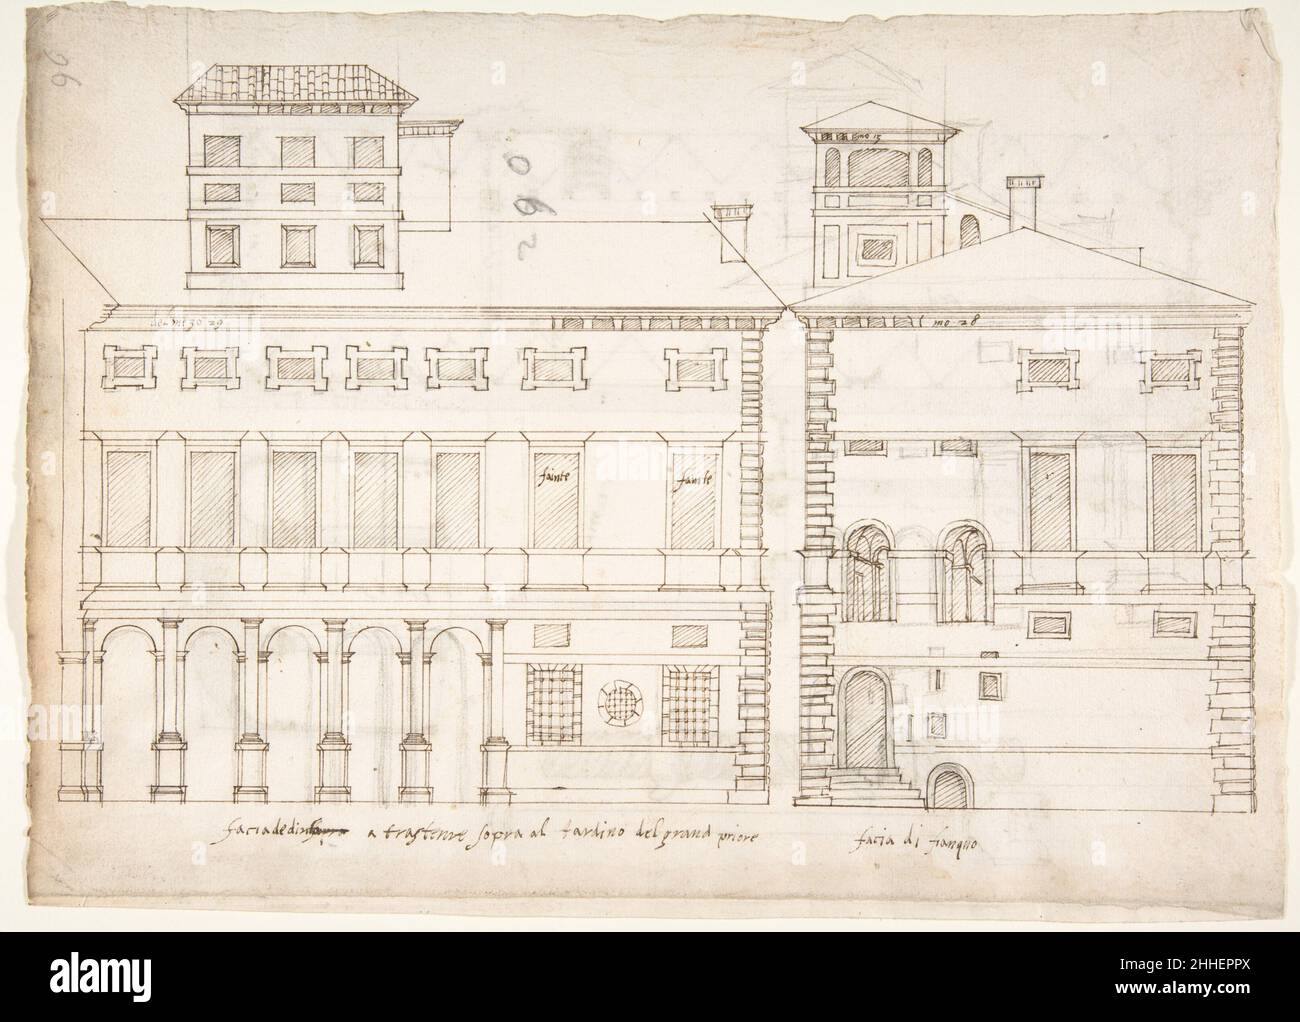 Palazzo Salviati-Adimari elevations (recto) Villa Farnesina stables, plan and section; drawing of a screw (verso) early to mid-16th century Drawn by Anonymous, French, 16th century French. Palazzo Salviati-Adimari elevations (recto) Villa Farnesina stables, plan and section; drawing of a screw (verso)  360494 Stock Photo